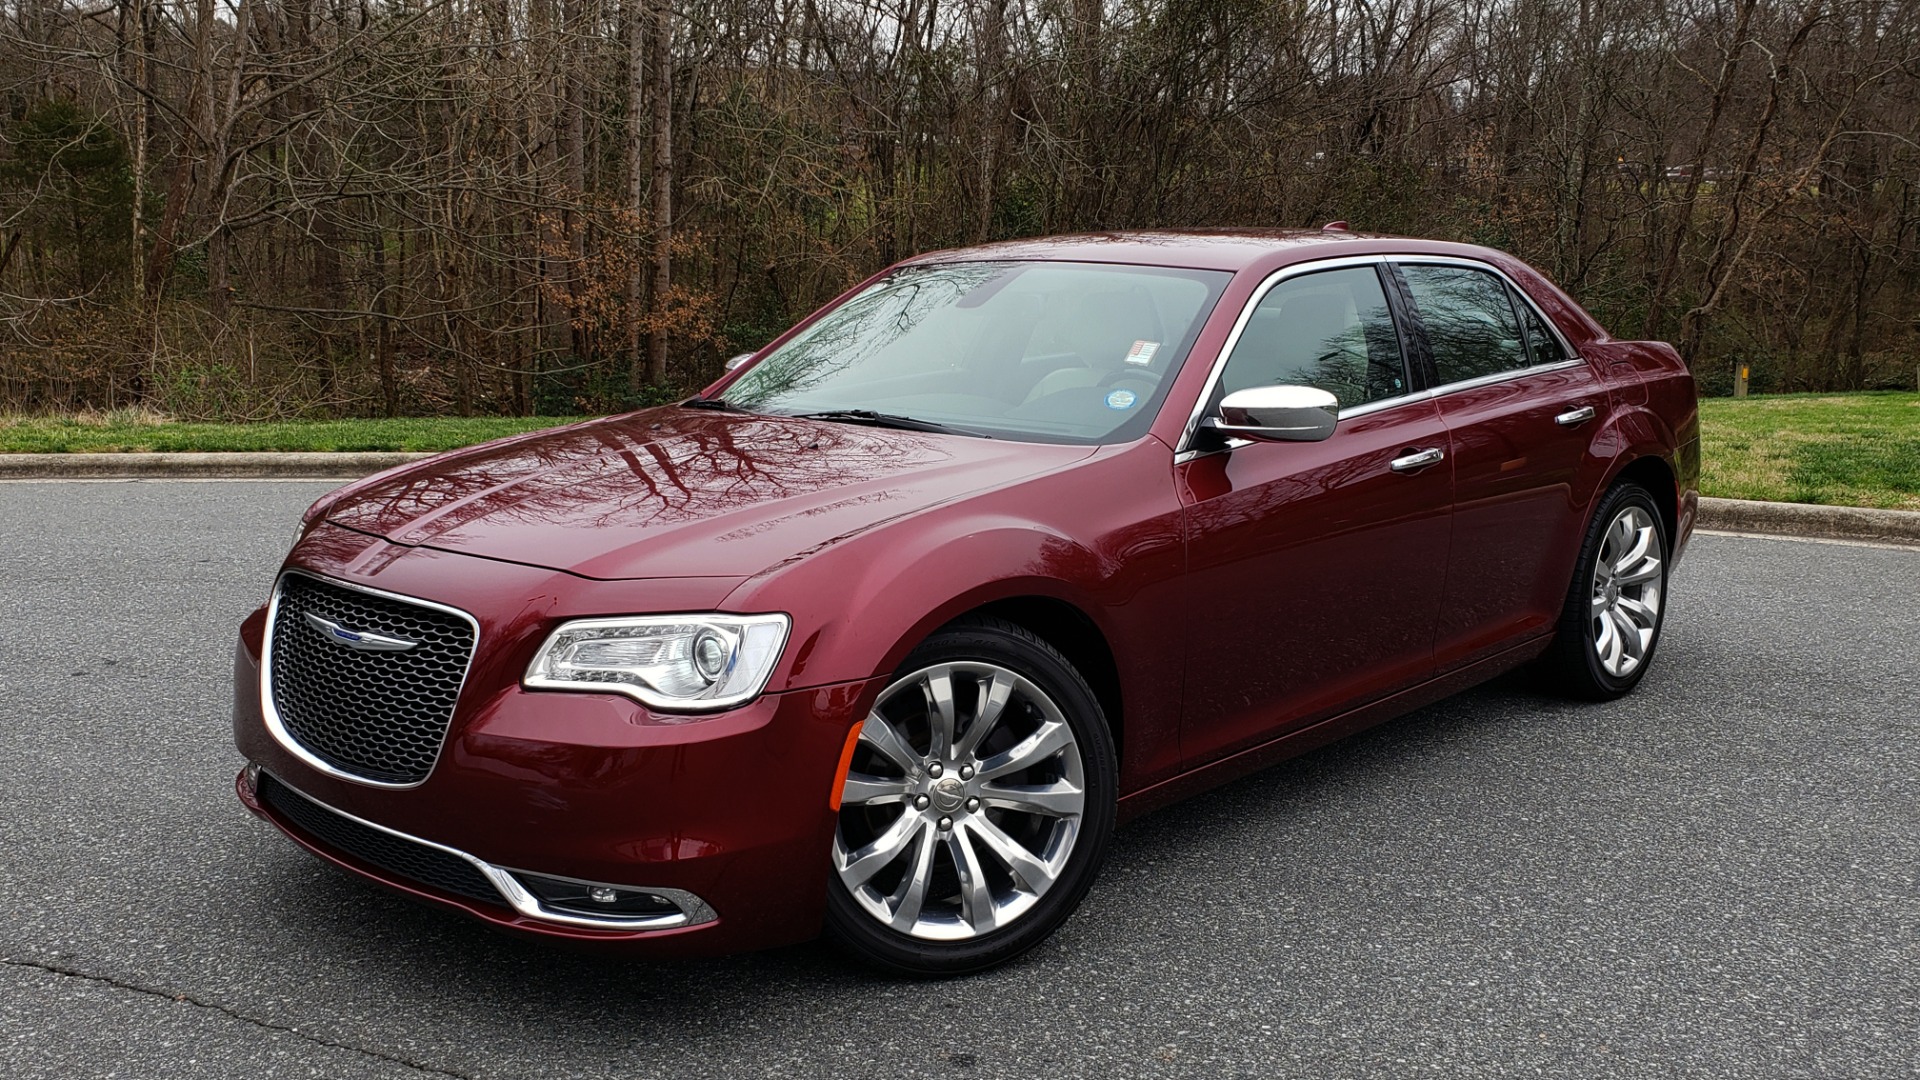 Used 2019 Chrysler 300 LIMITED / 3.6L V6 / 8-SPD AUTO / LEATHER / REARVIEW for sale Sold at Formula Imports in Charlotte NC 28227 1